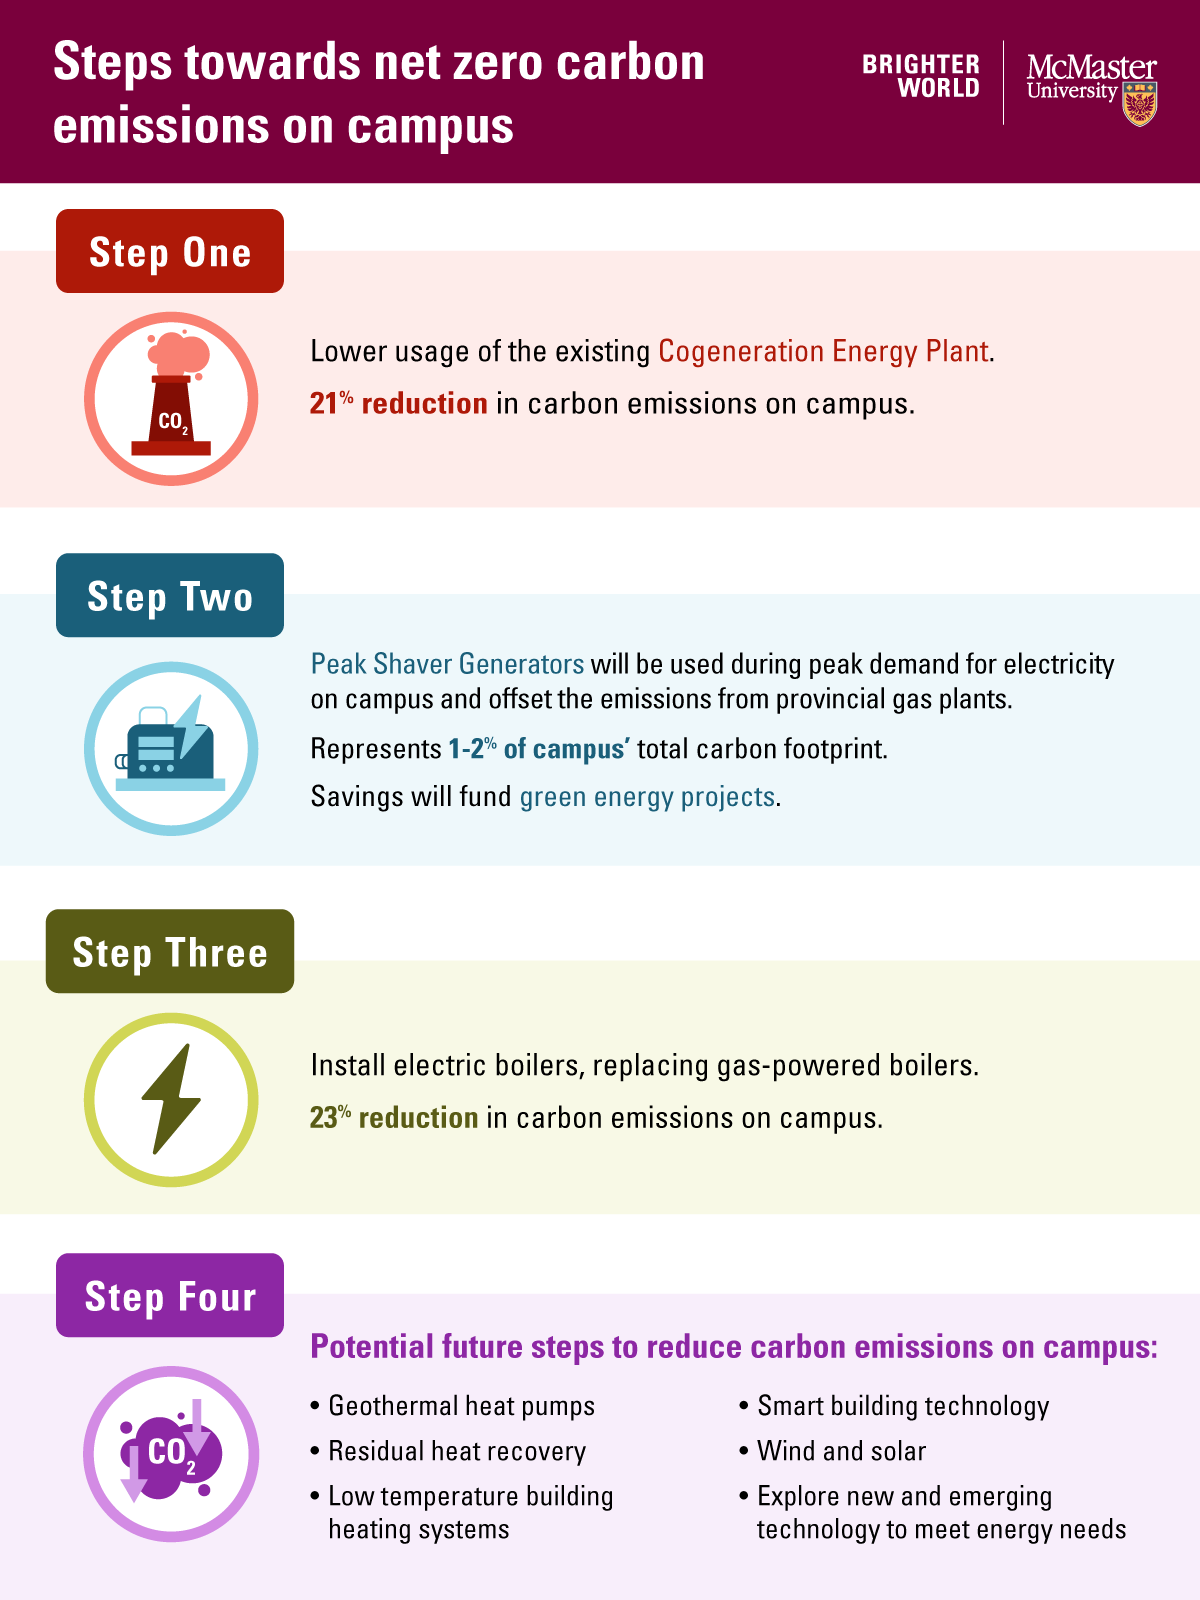 A graphic showing steps toward net zero carbon emissions on campus